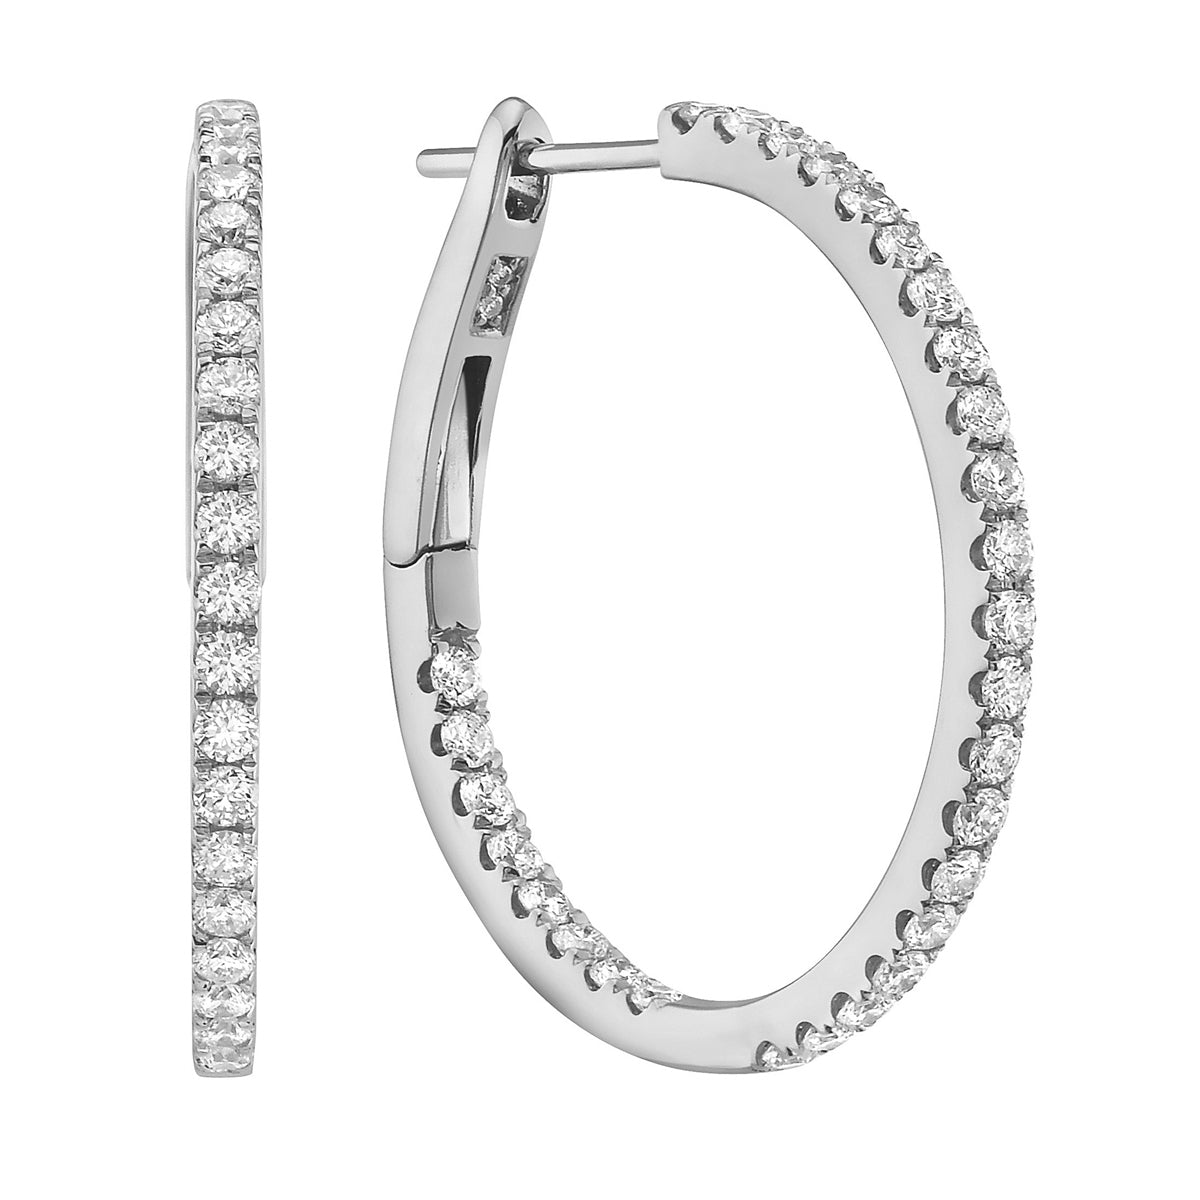 1.0 in White Gold Inside and Out Diamond Hoop Earrings